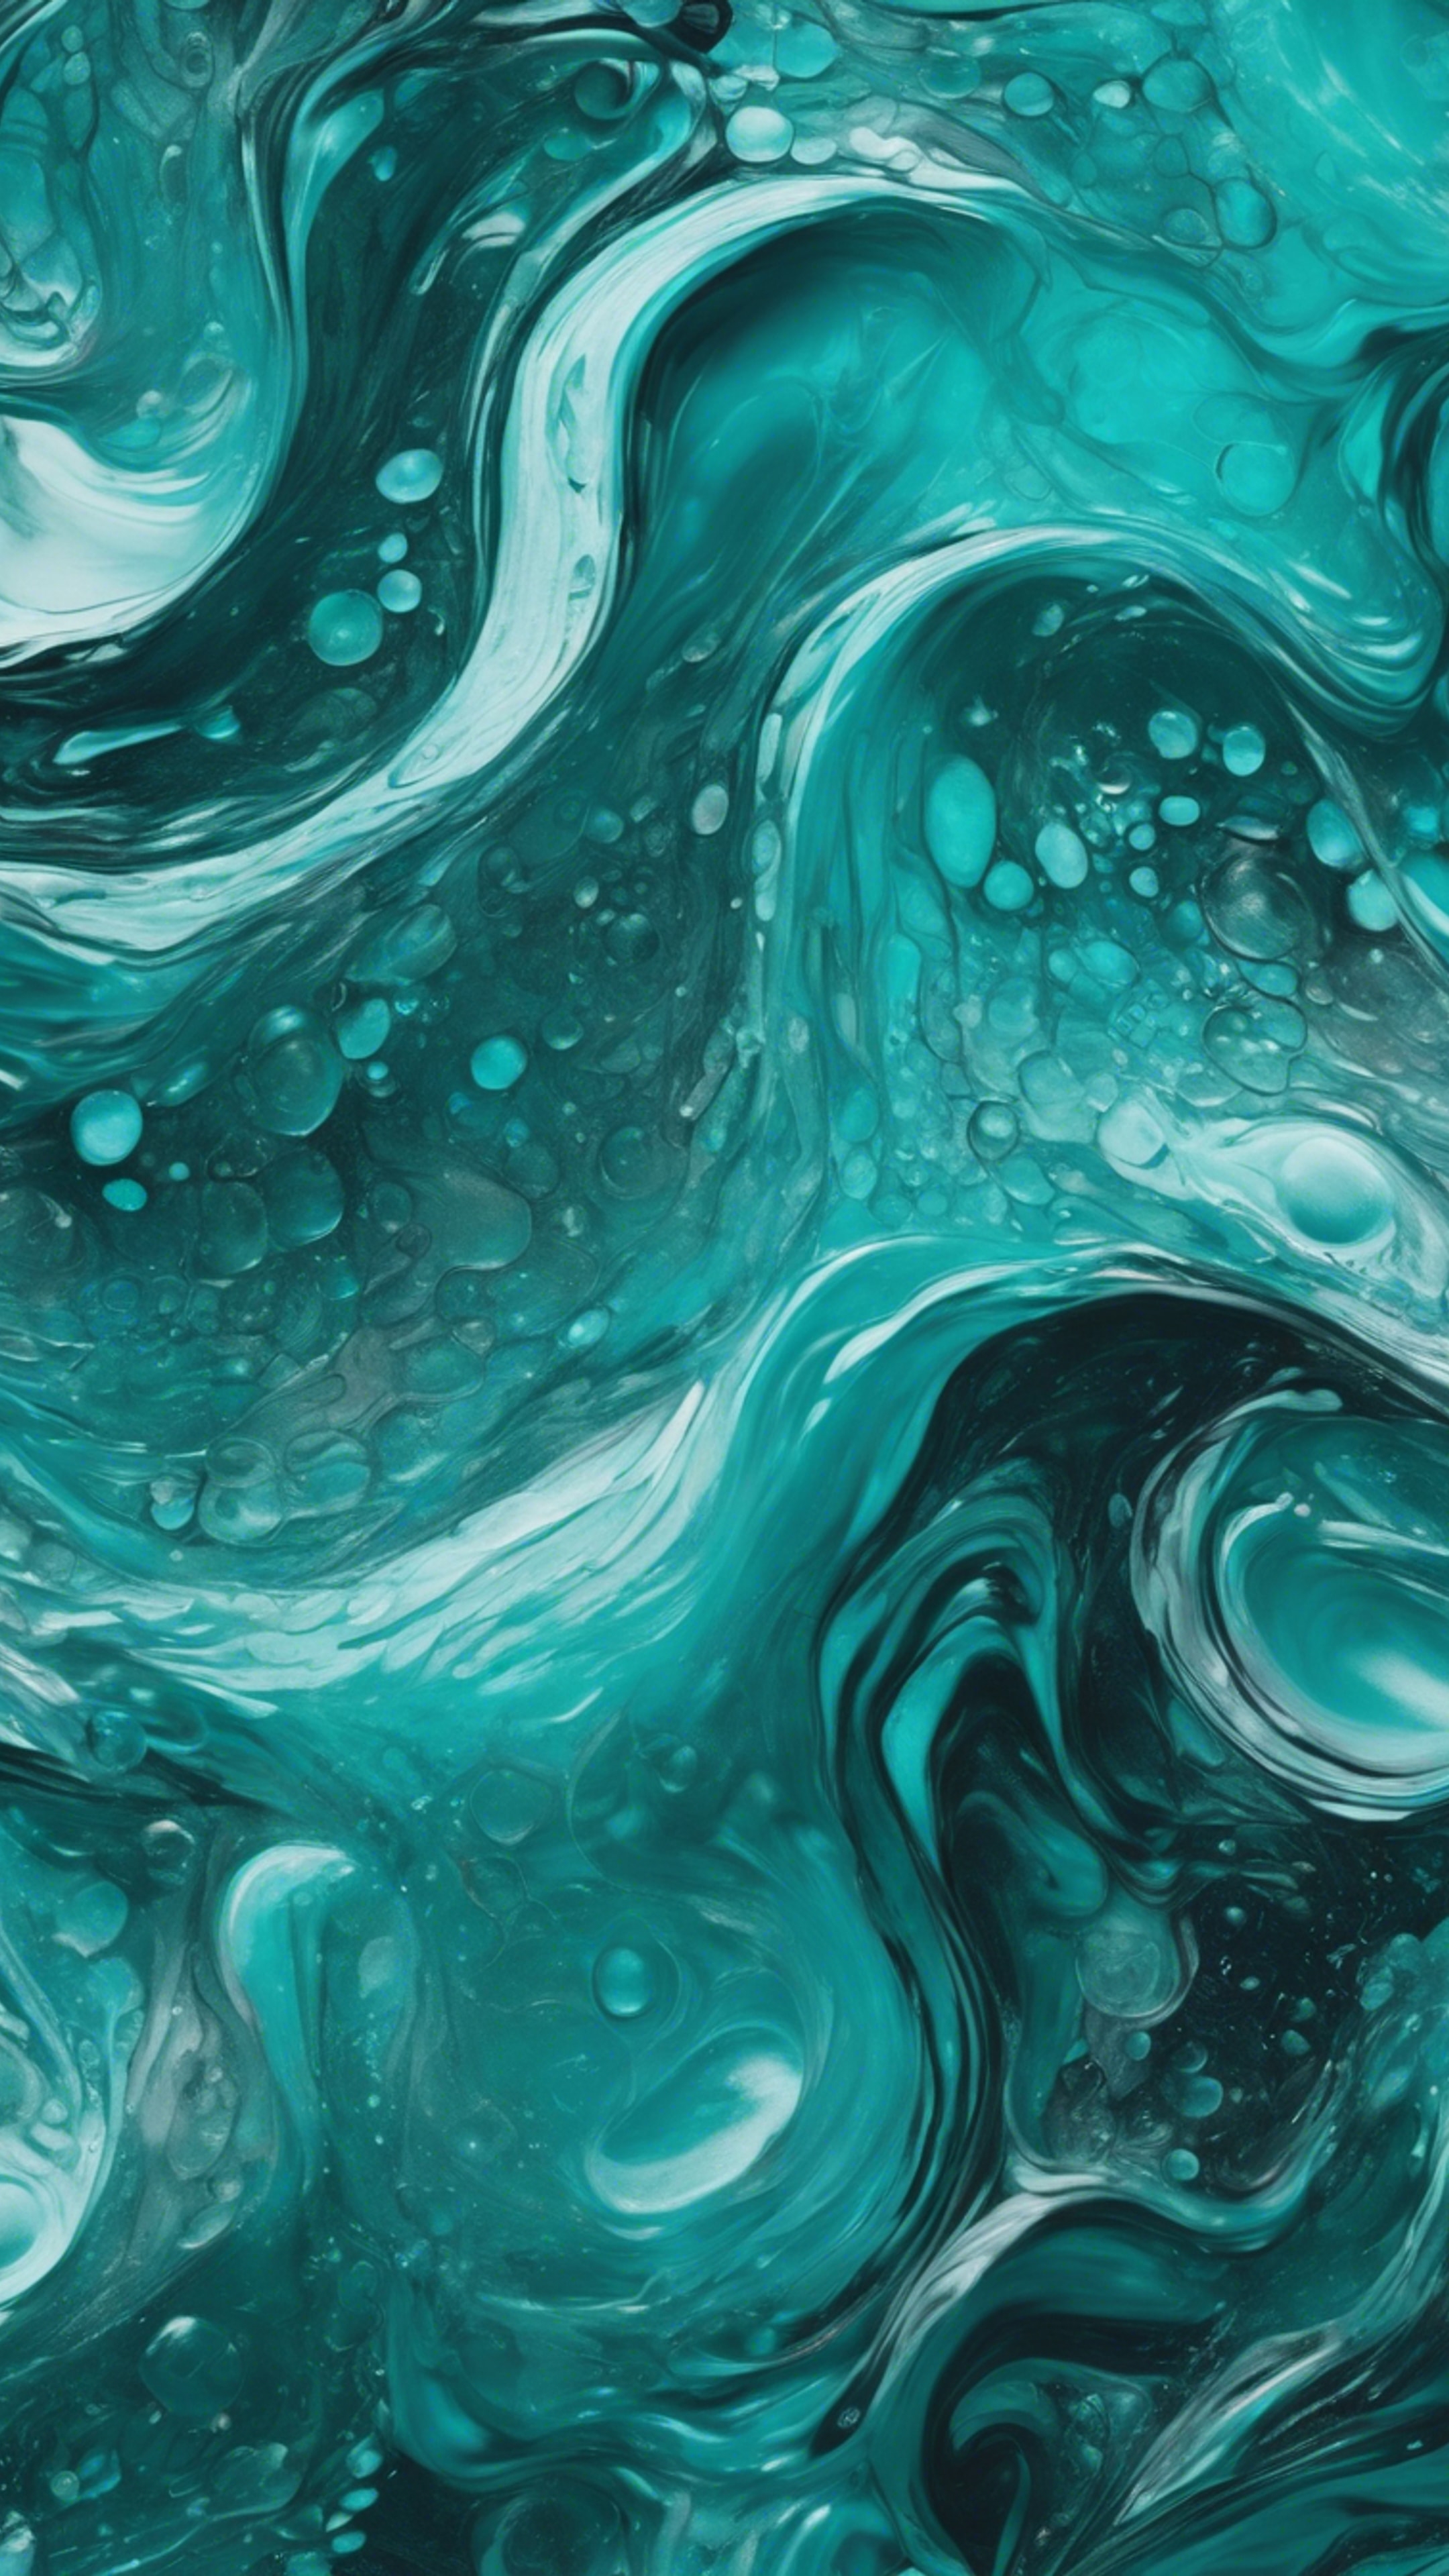 Abstract painting with swirling waves of shades of cool teal. Papel de parede[053c1b1ade8044ef8a45]